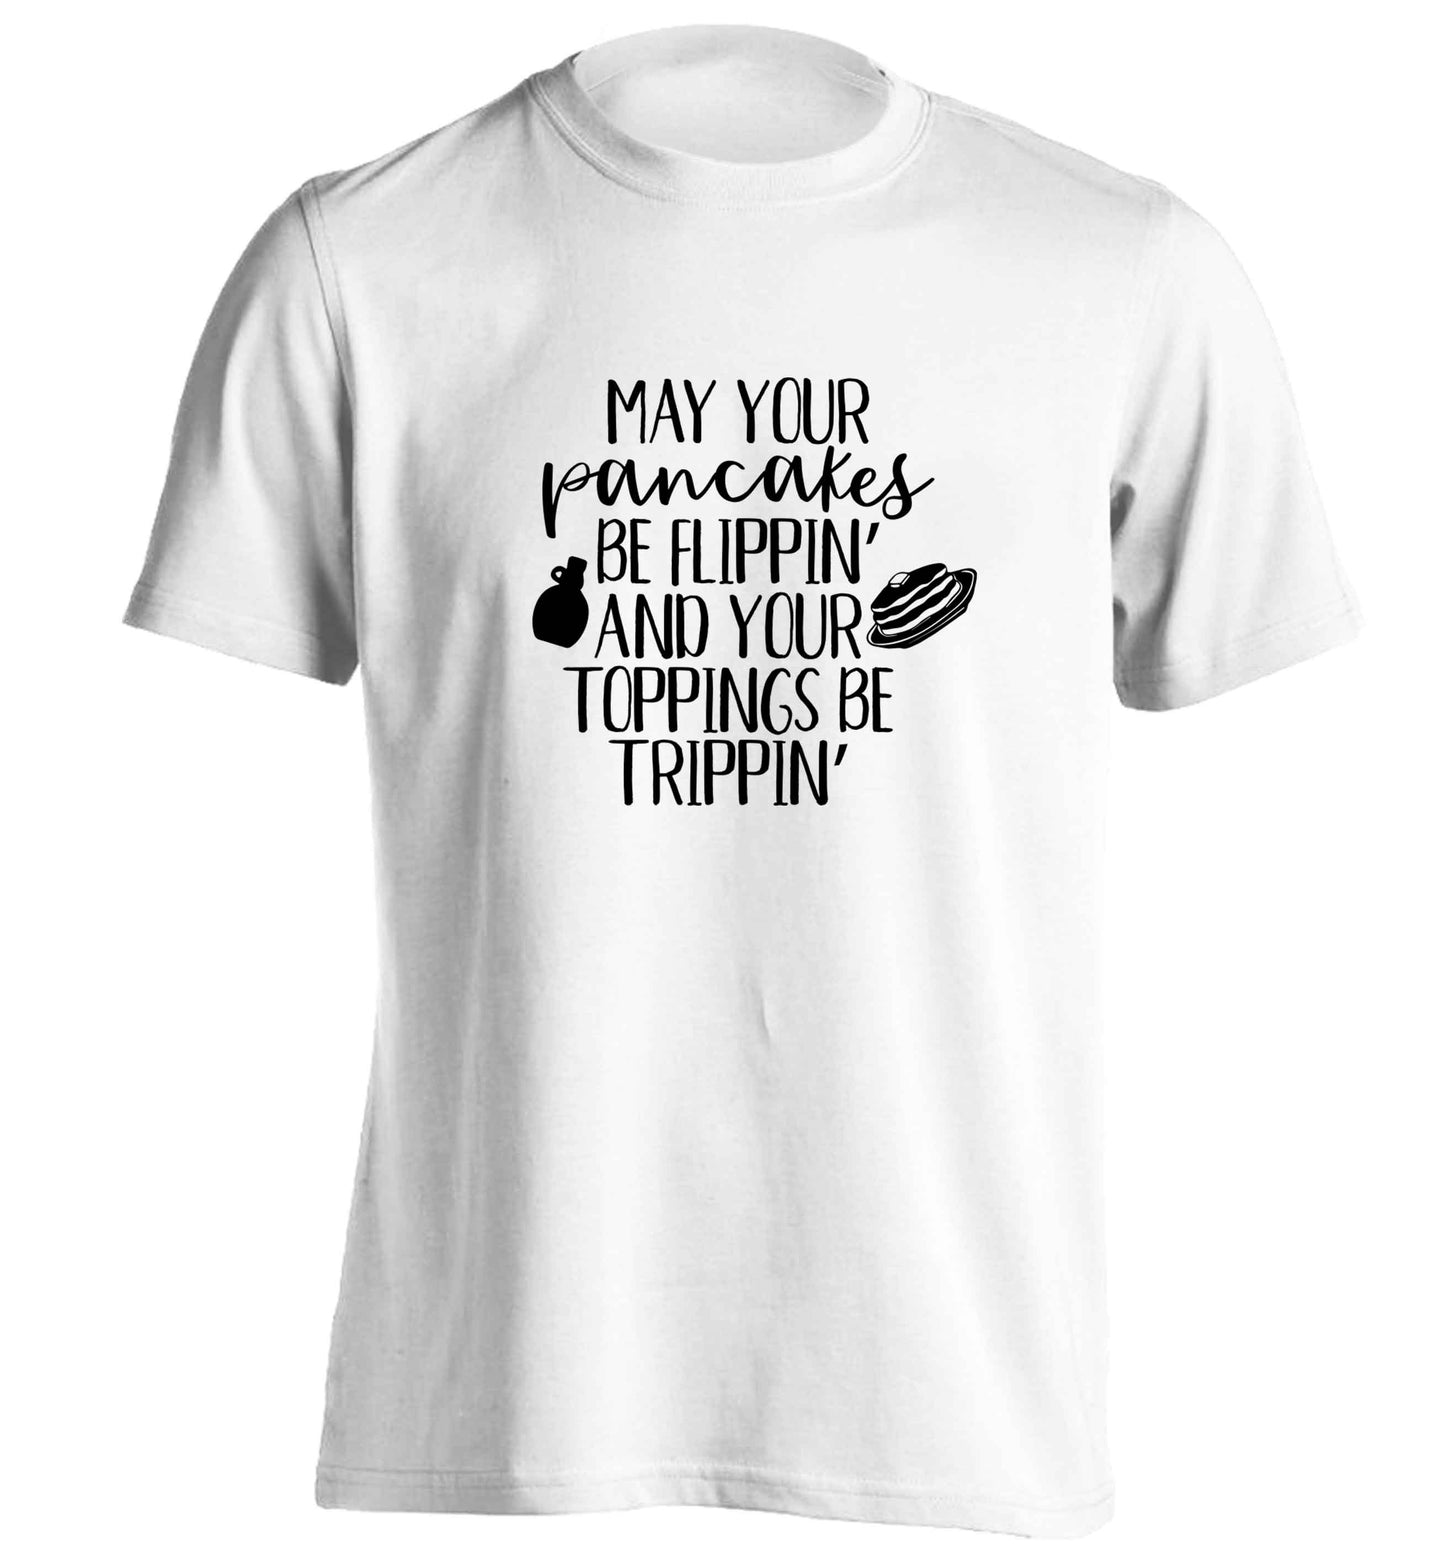 May your pancakes be flippin' and your toppings be trippin' adults unisex white Tshirt 2XL